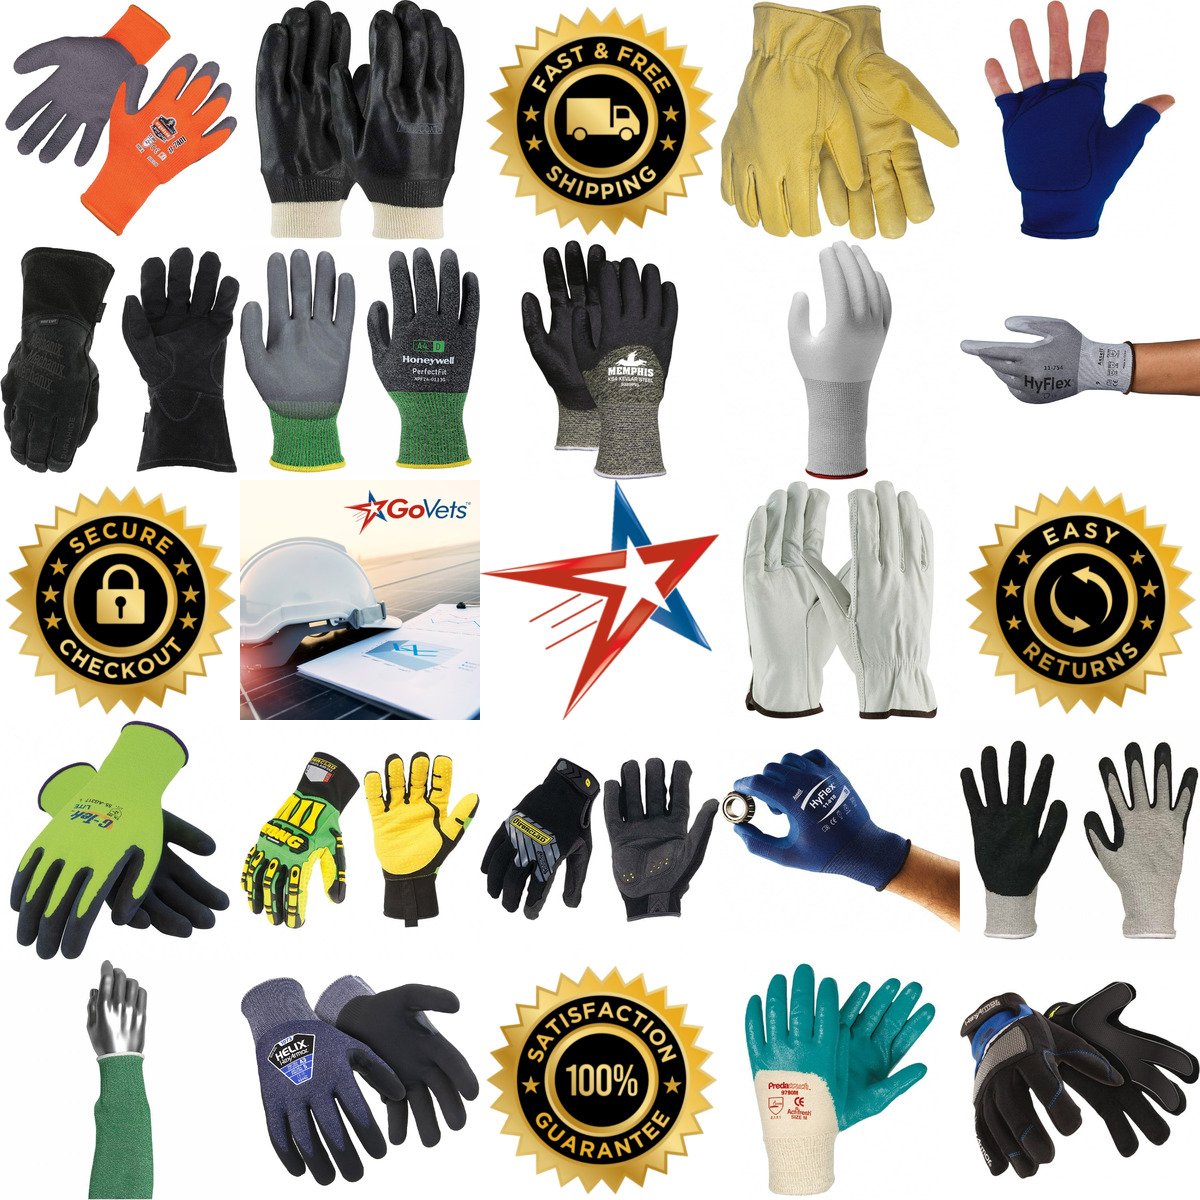 A selection of Gloves and Hand Protection products on GoVets